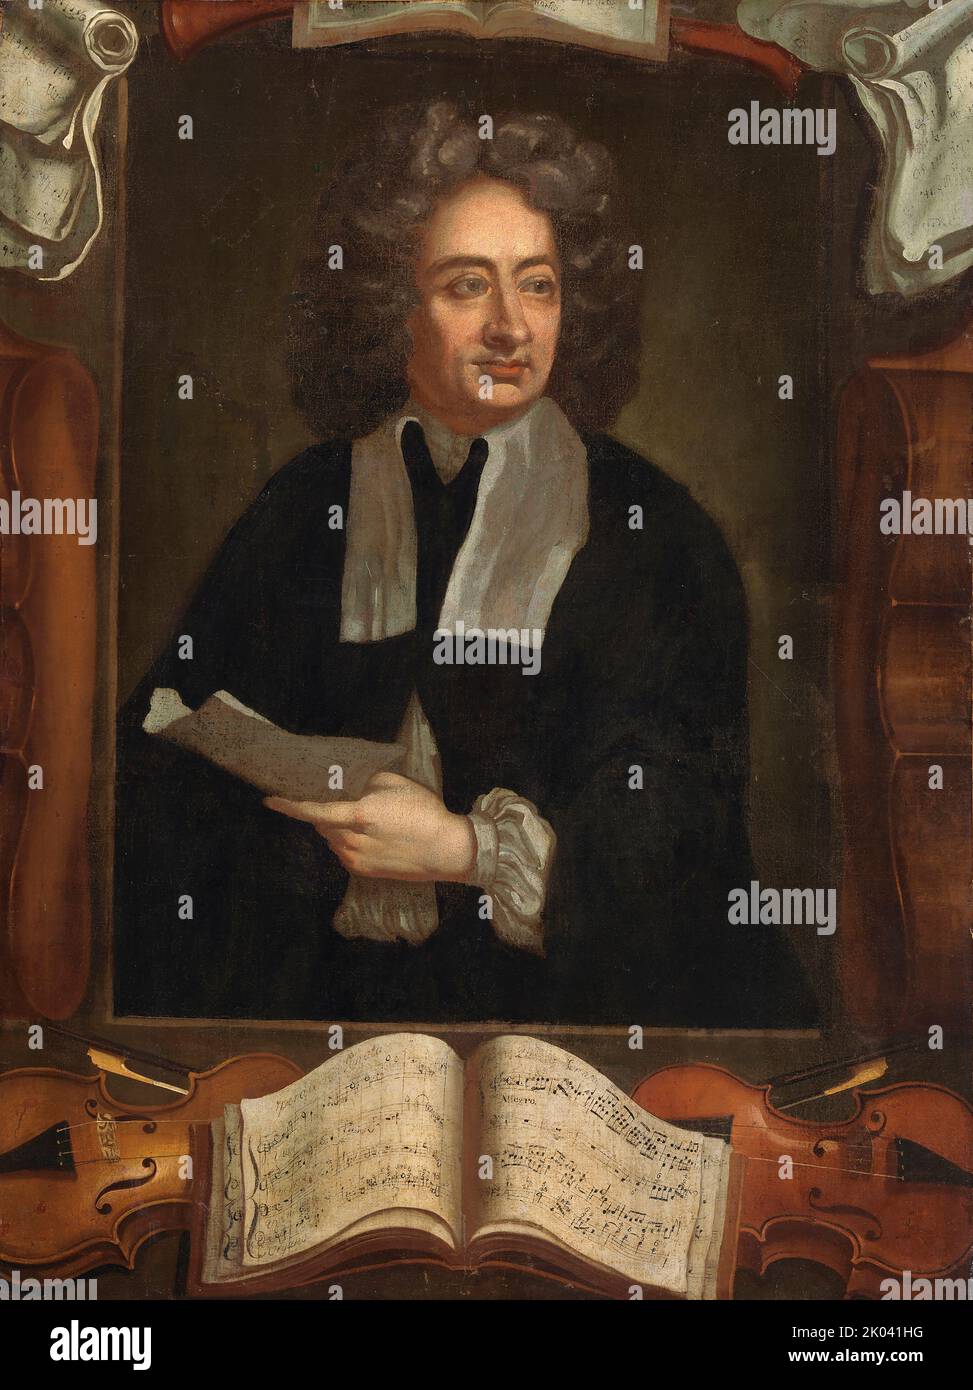 Portrait of the composer Arcangelo Corelli (1653-1713), ca 1699. Found in the collection of the National Gallery of Ireland. Stock Photo